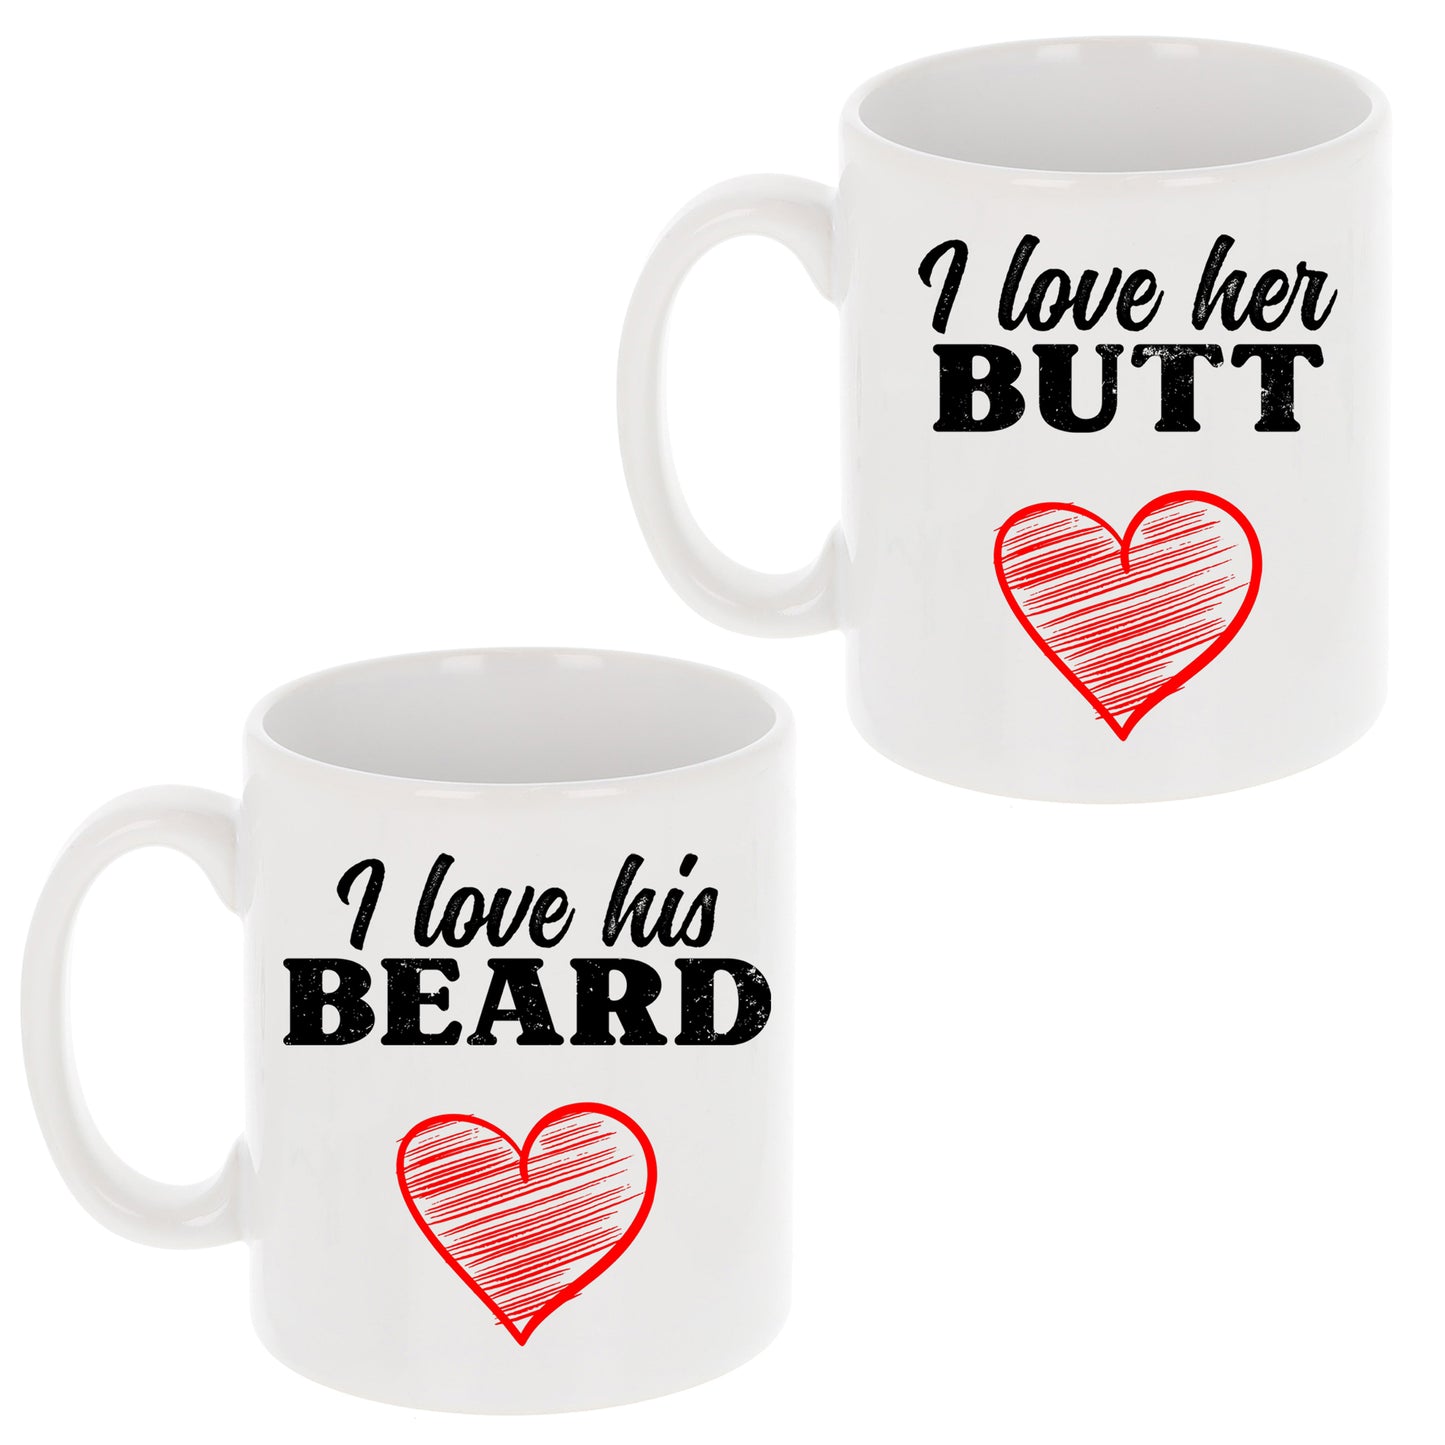 I Love His Beard / Her Butt Mug and/or Coaster Gift  - Always Looking Good - Set Of 2 Mugs Only  